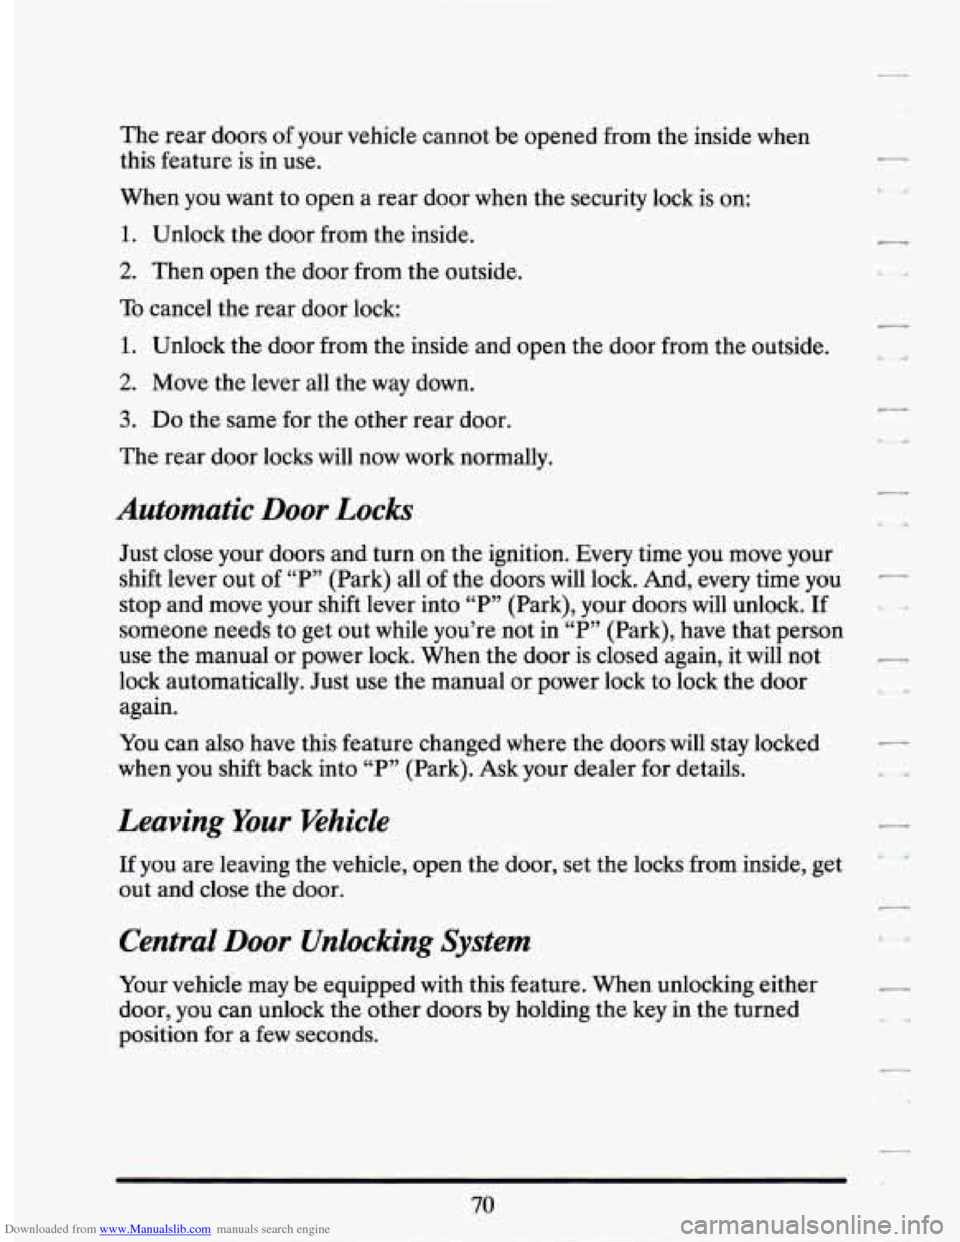 CADILLAC SEVILLE 1994 4.G Owners Manual Downloaded from www.Manualslib.com manuals search engine The  rear doors of your  vehicle  cannot be opened  from the inside  when 
this  feature  is  in  use. 
When  you  want  to open  a rear  door 